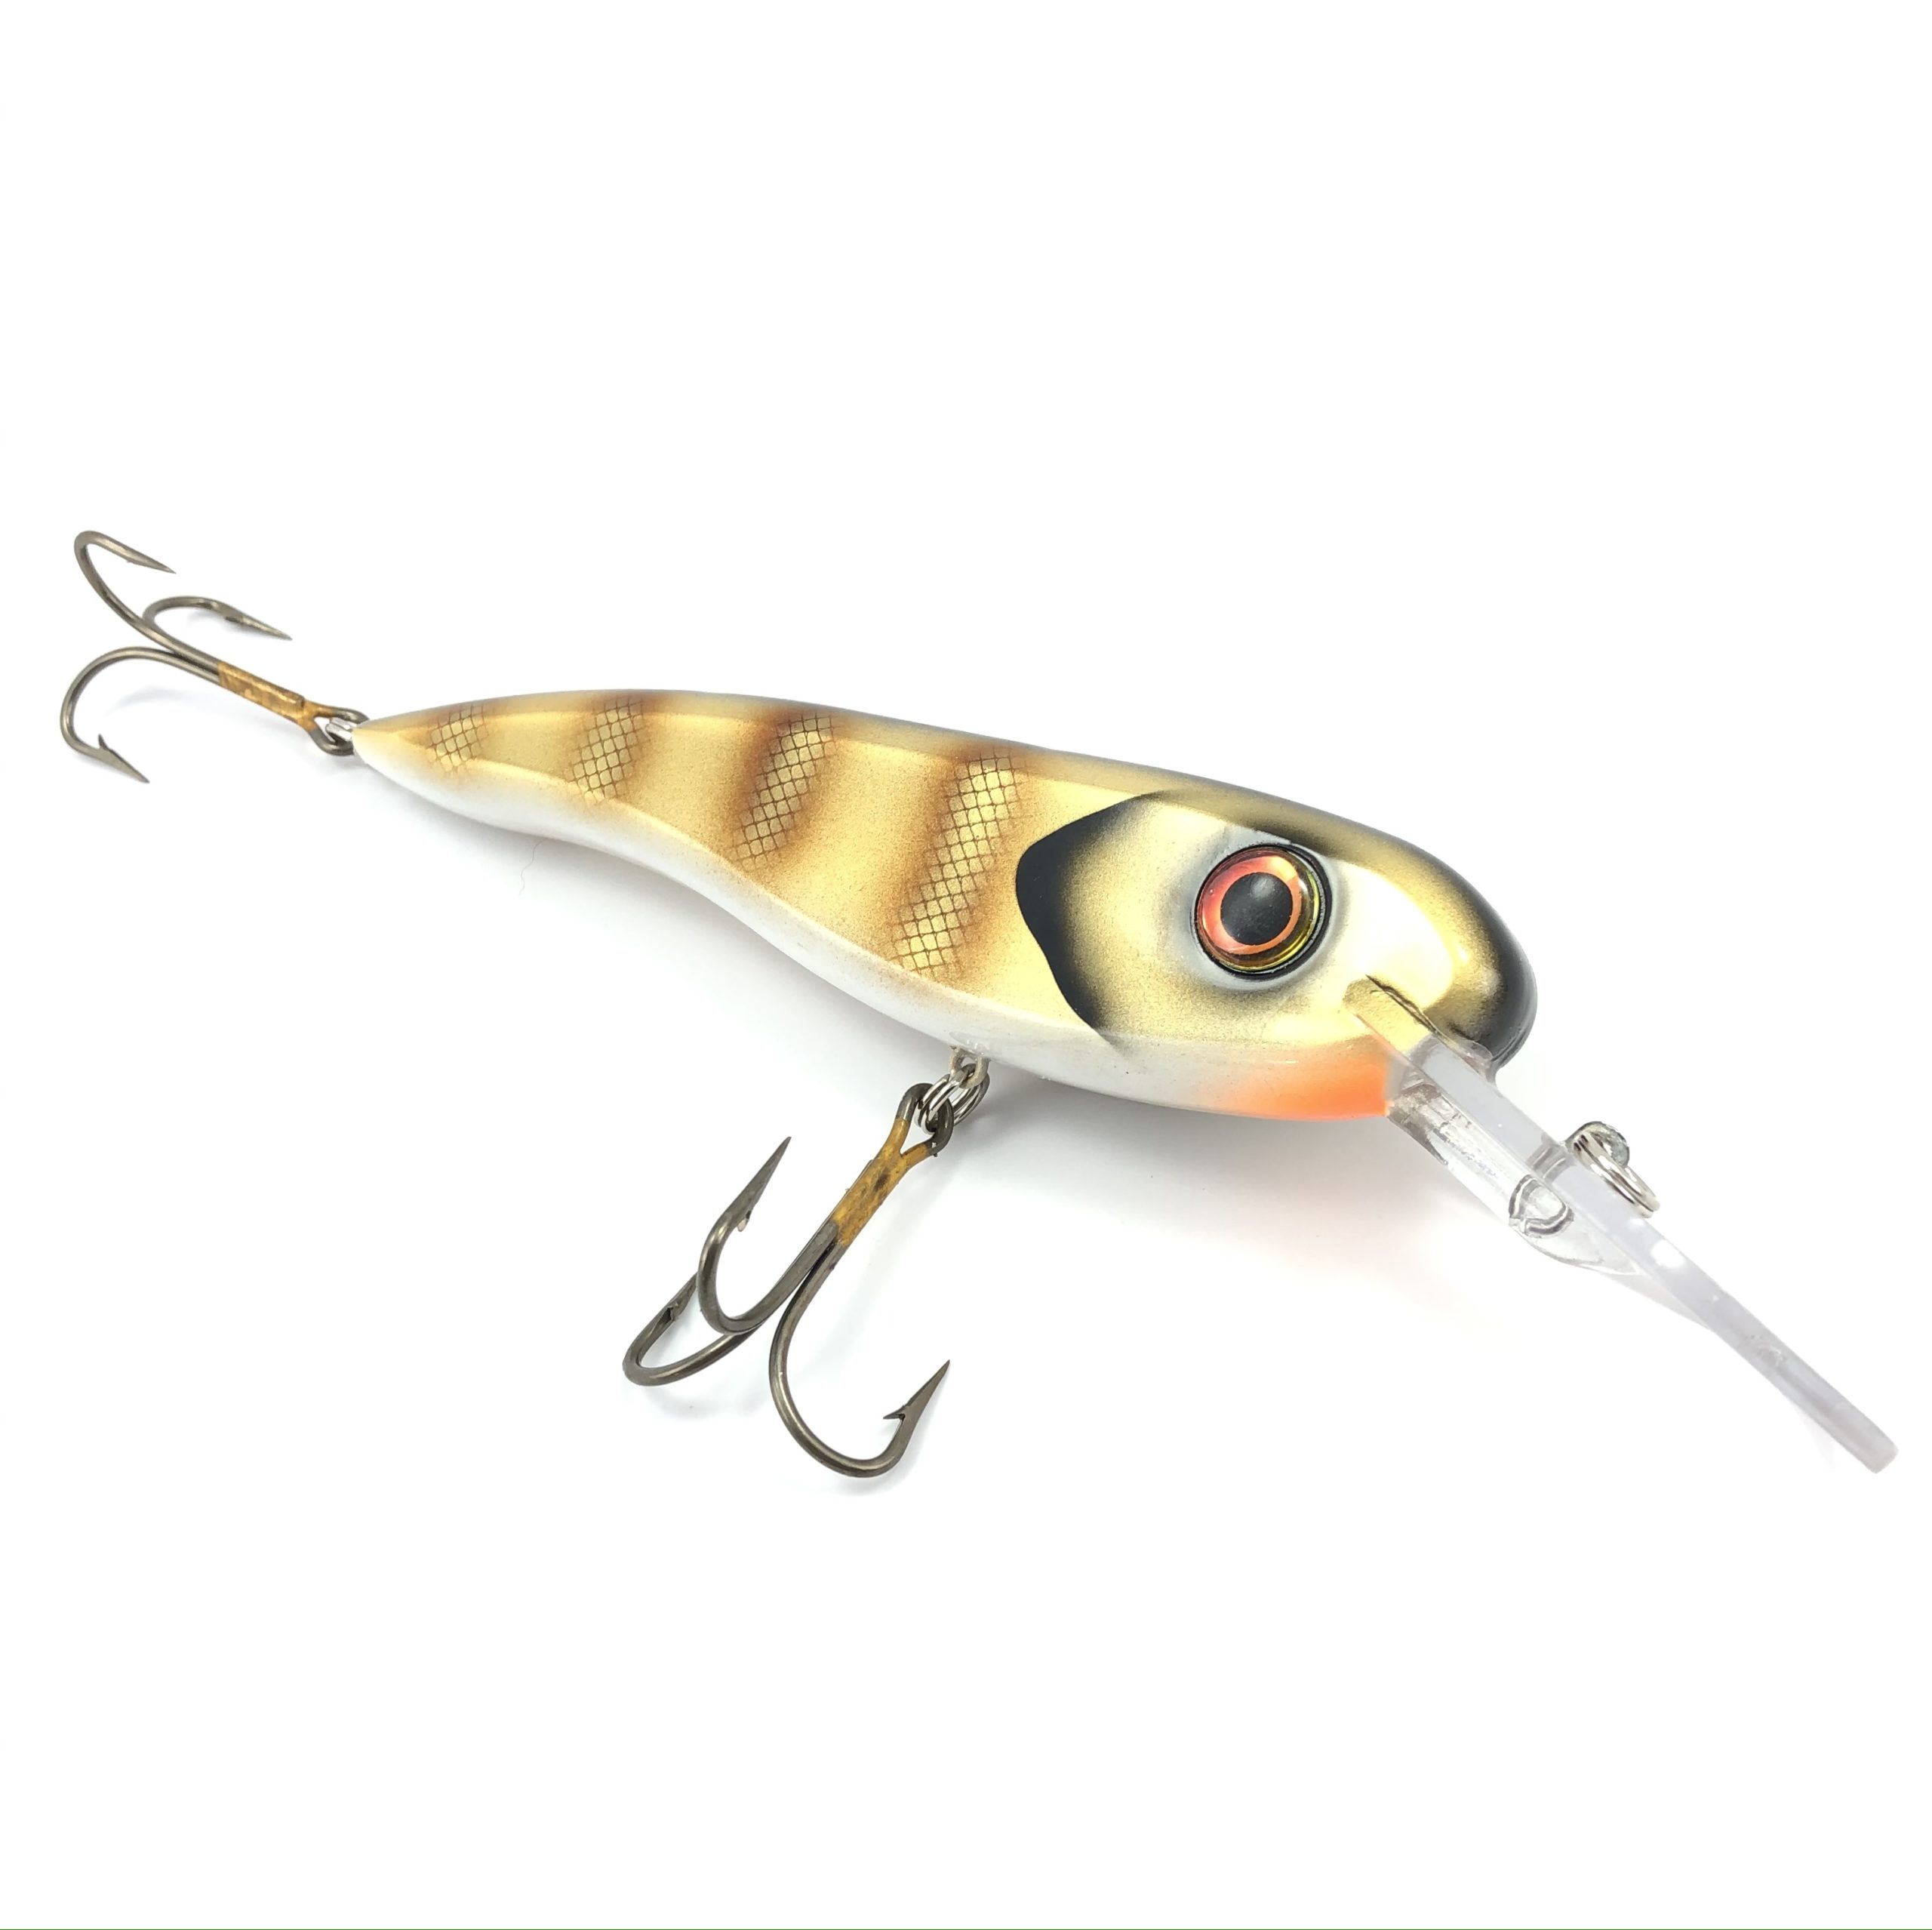 EWE New Twister Fishing Lures High Frequency Tremor Long Cast